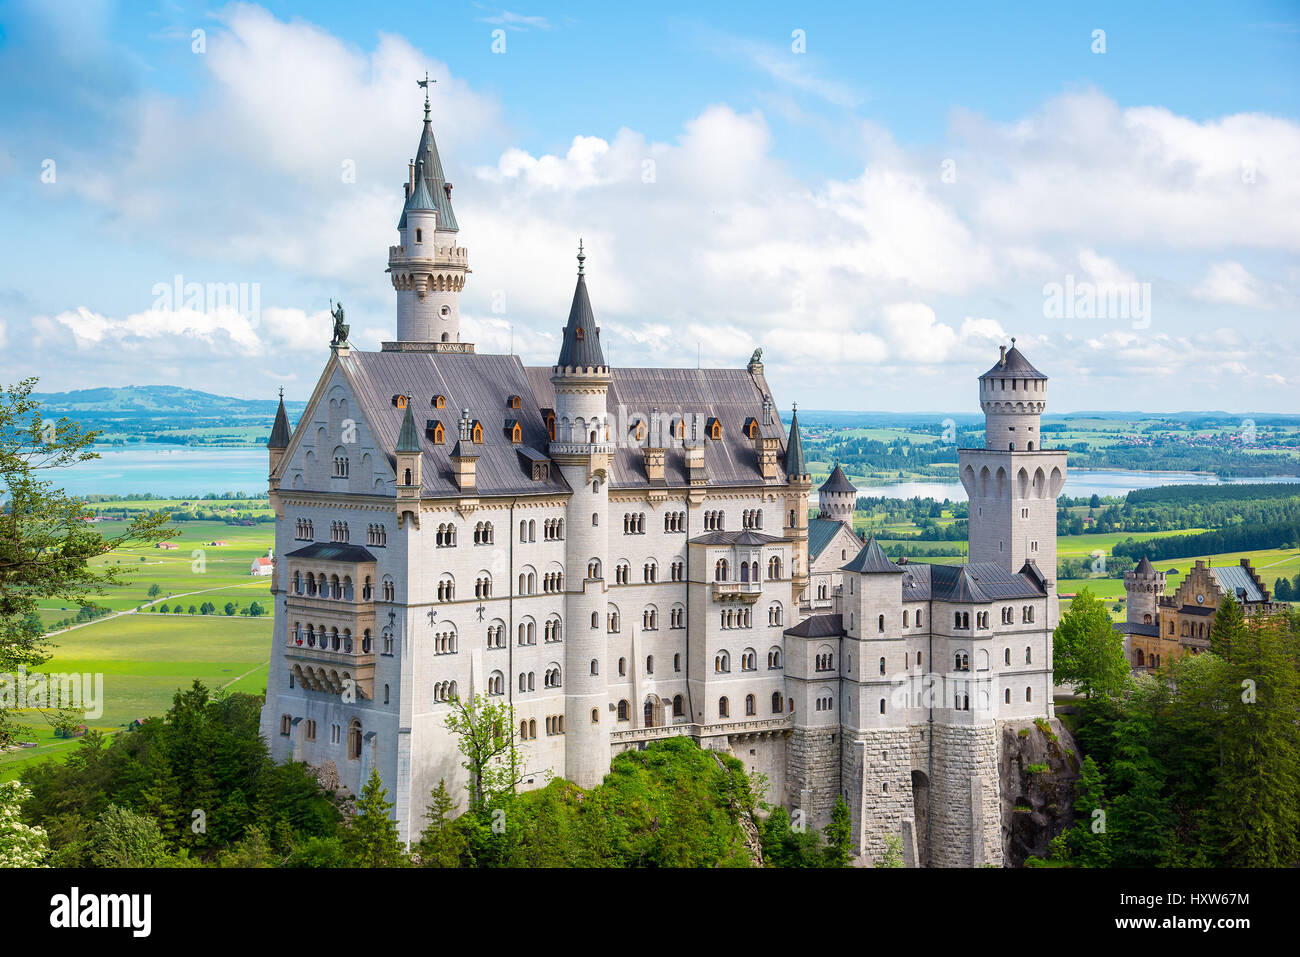 Beautiful view of world-famous Neuschwanstein Castle, the 19th century Romanesque Revival palace built for King Ludwig II, with scenic mountain landsc Stock Photo